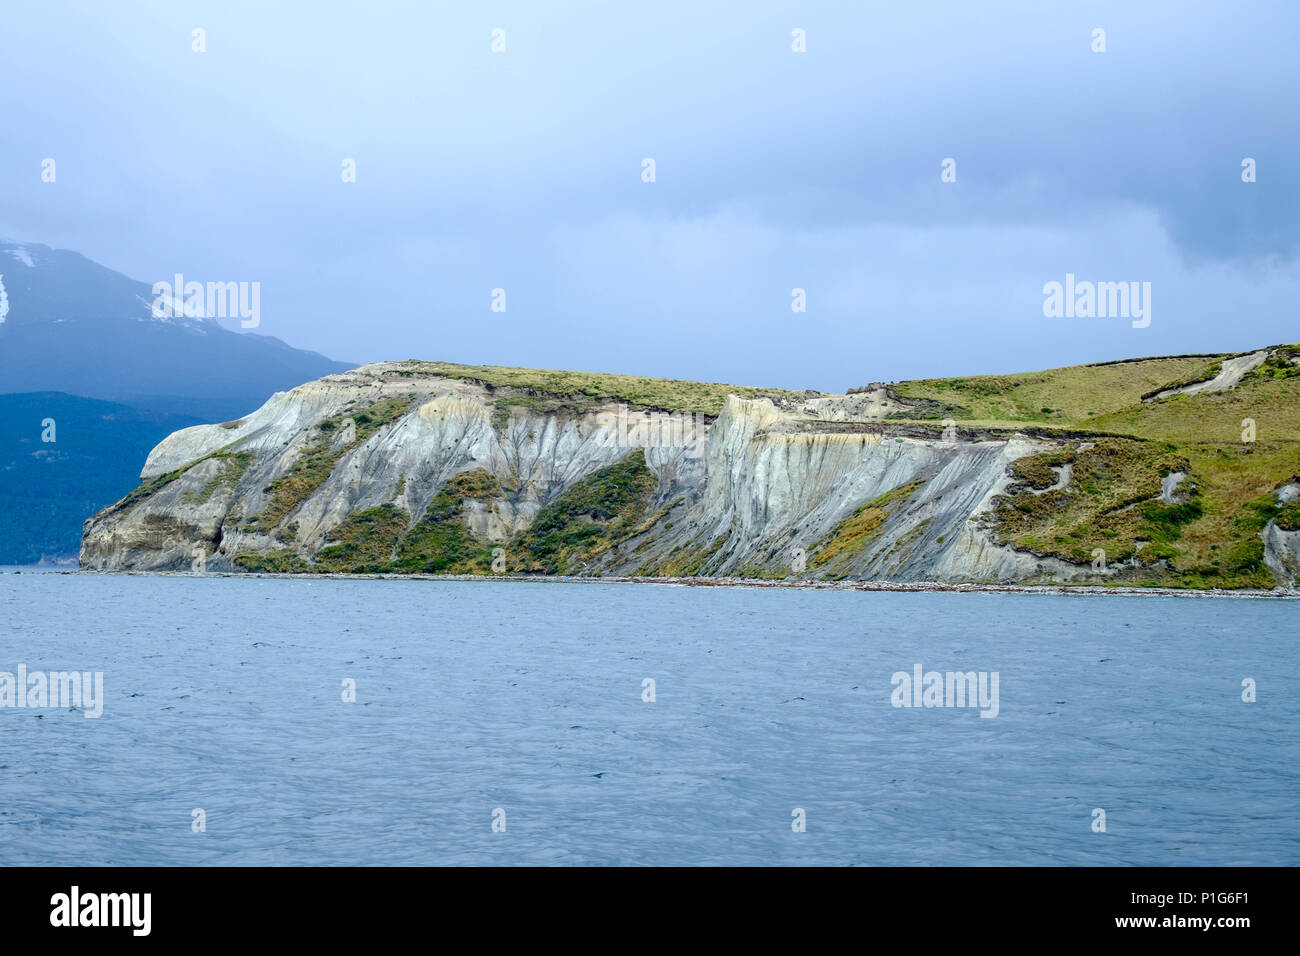 Coastline of an island in the Beagle Channel, not far from the Argentinian town of Ushuaia. Stock Photo